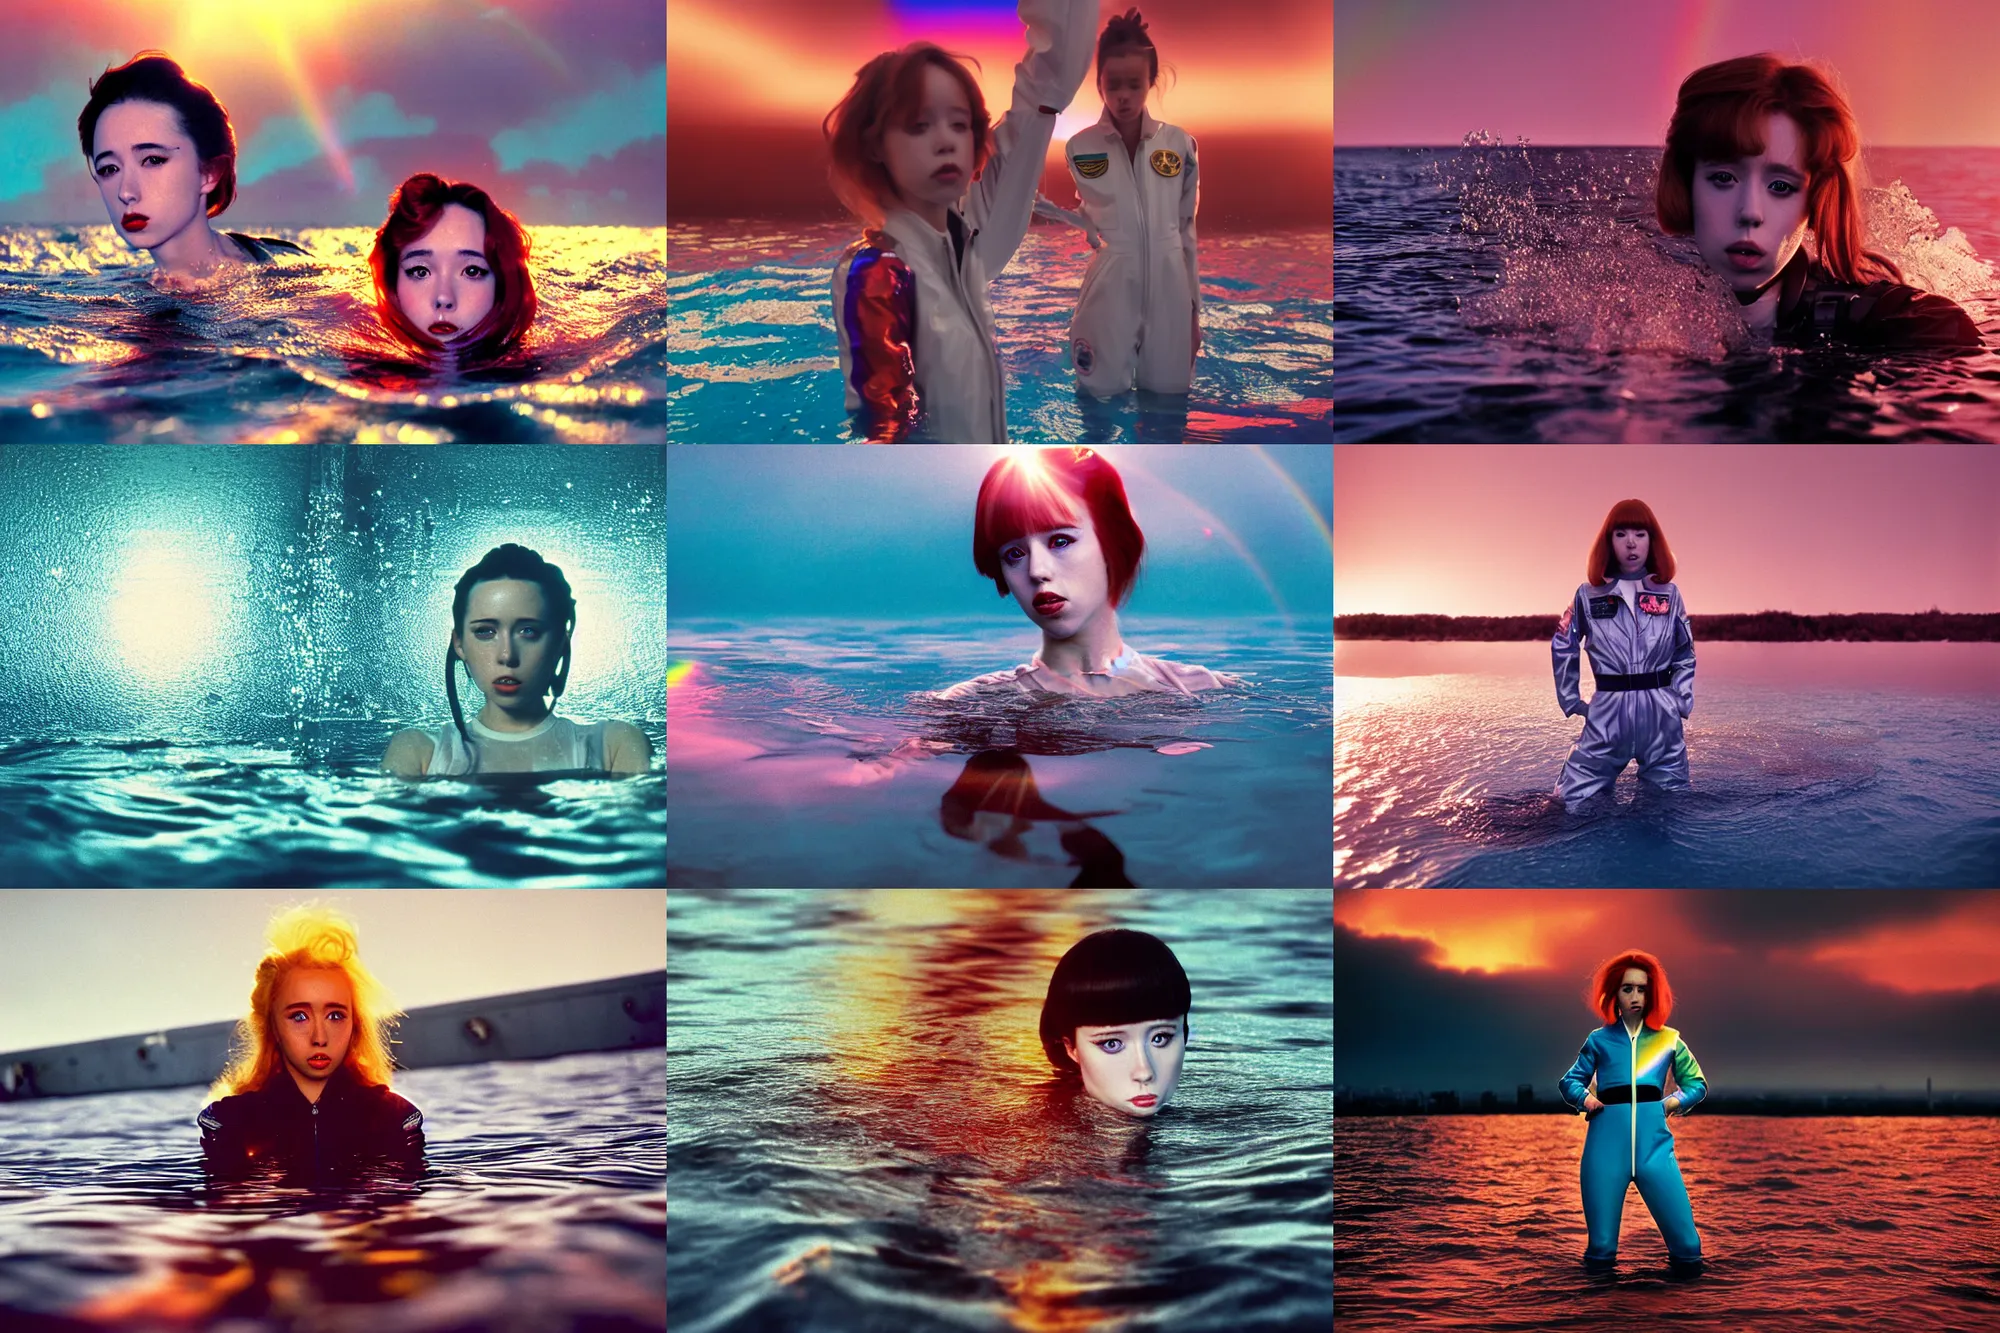 Prompt: Beautiful Holly Herndon style cottagecore seinen manga Fashion photography portrait tokyo top gun(1980) movie still from underwater space dance scene of model, wearing refracting rainbow diffusion wet plastic Balenciaga designed specular highlights anti-g flight jump suit, half submerged in heavy sunset golden hour floods, water to waist, , épaule devant pose;pursed lips;athletic; pixie hair,eye contact, ultra realistic, Panavision Panaflex X , Technicolor, 8K, 35mm lens, three point perspective, tilt shift mirror kaleidoscope orbs background, extreme closeup portrait, chiaroscuro, highly detailed, devine composition golden ration, by moma, by Nabbteeri by Sergey Piskunov